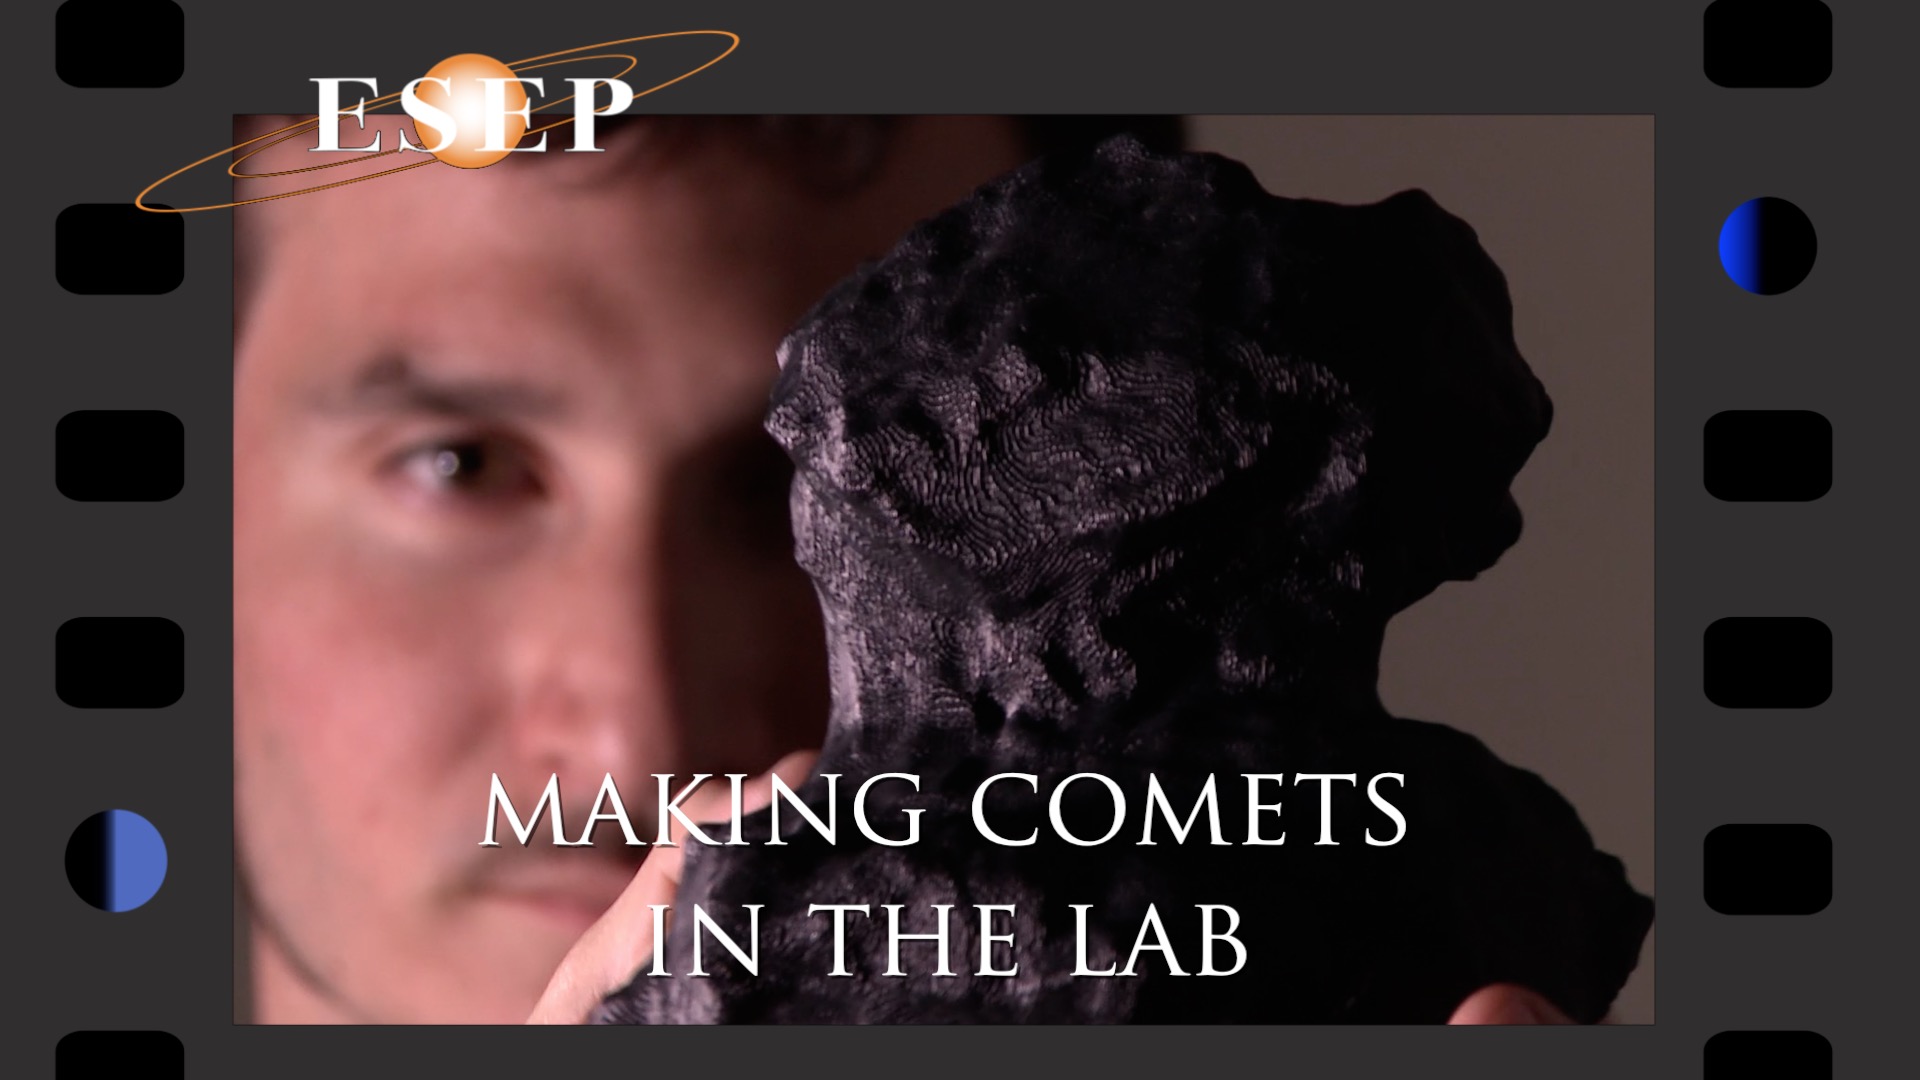 Making comets in the lab